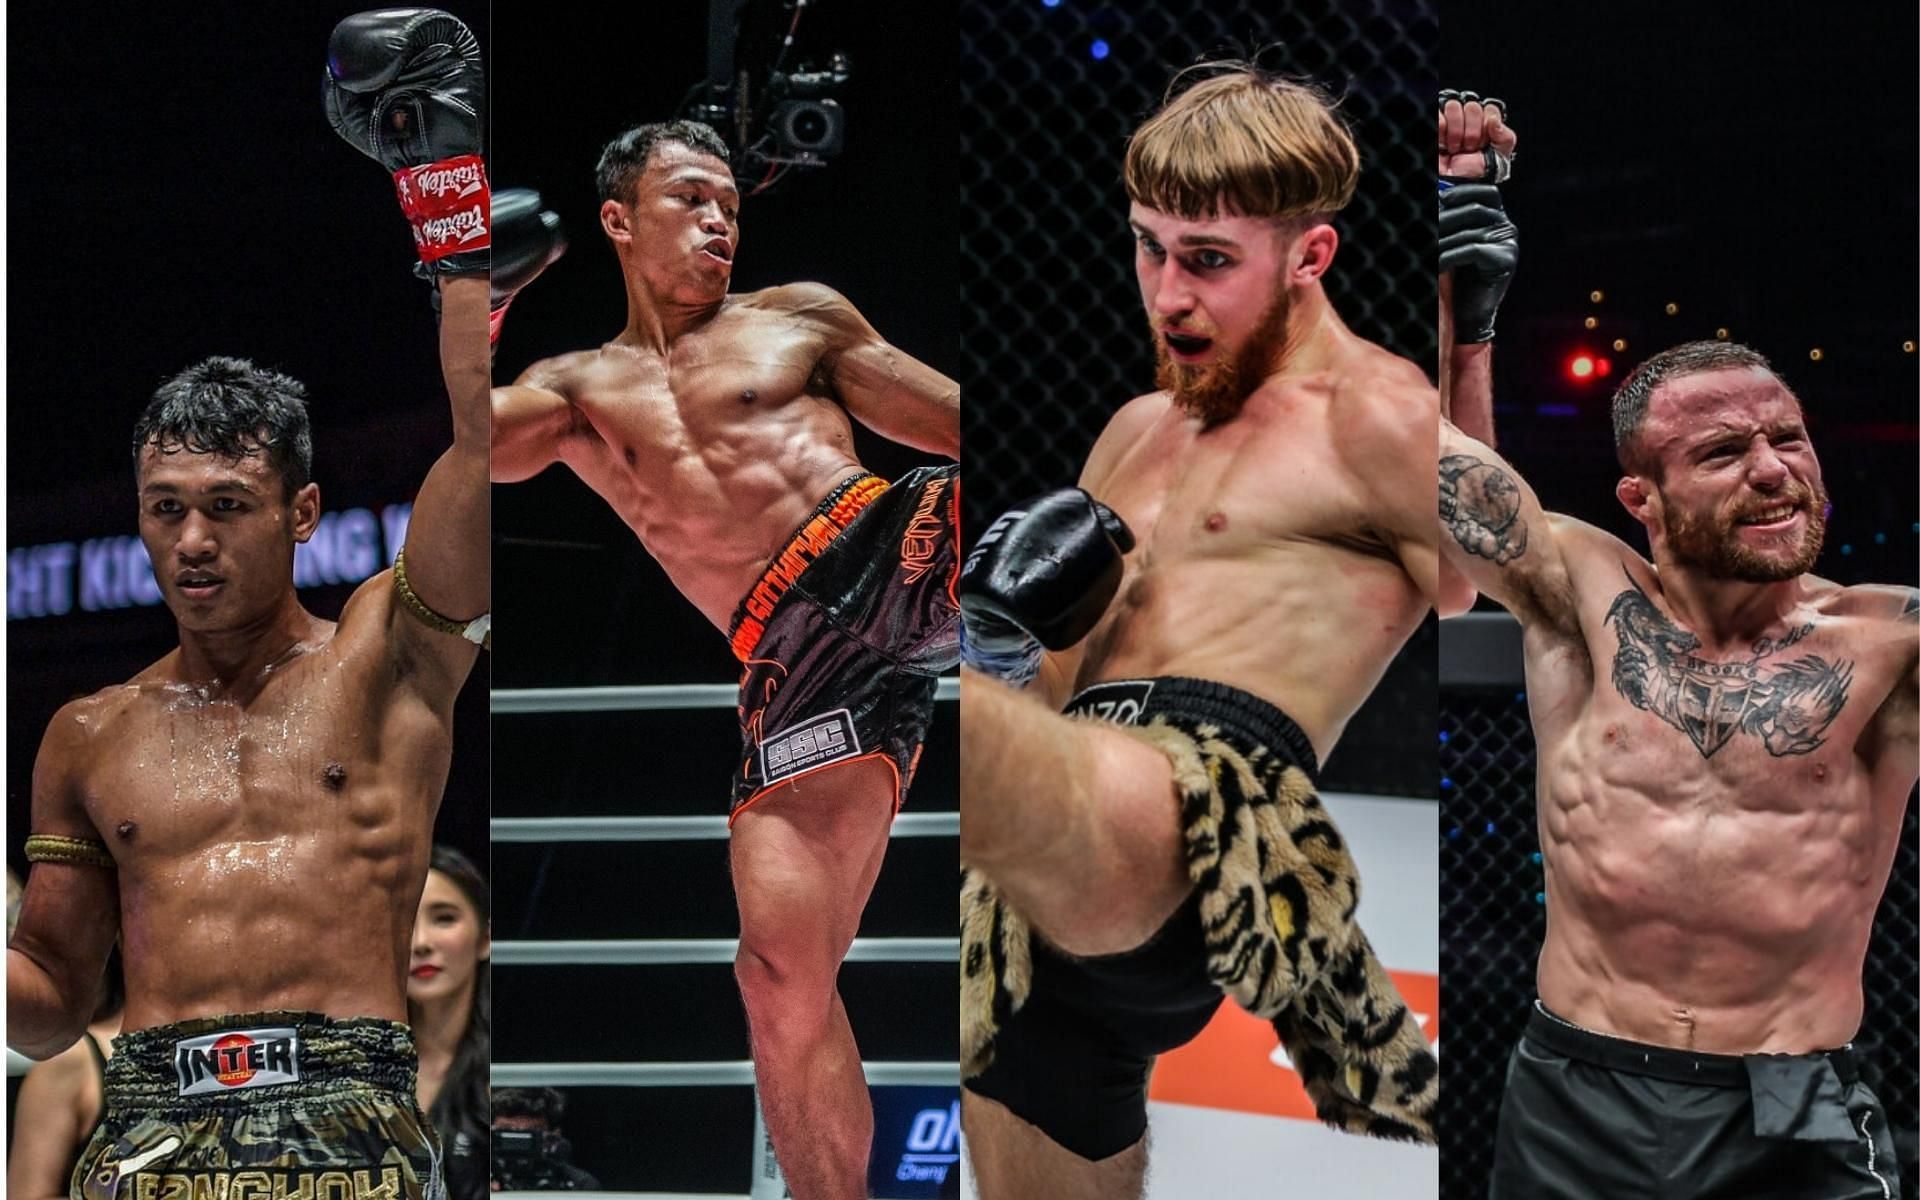 (From left to right) Jo Nattawut, Sitthichai Sitsongpeenong, Dovydas Rimkus, and Jarred Brooks are some of the fighters you should be excited to see at ONE Championship: Only The Brave. (Images courtesy of ONE Championship)